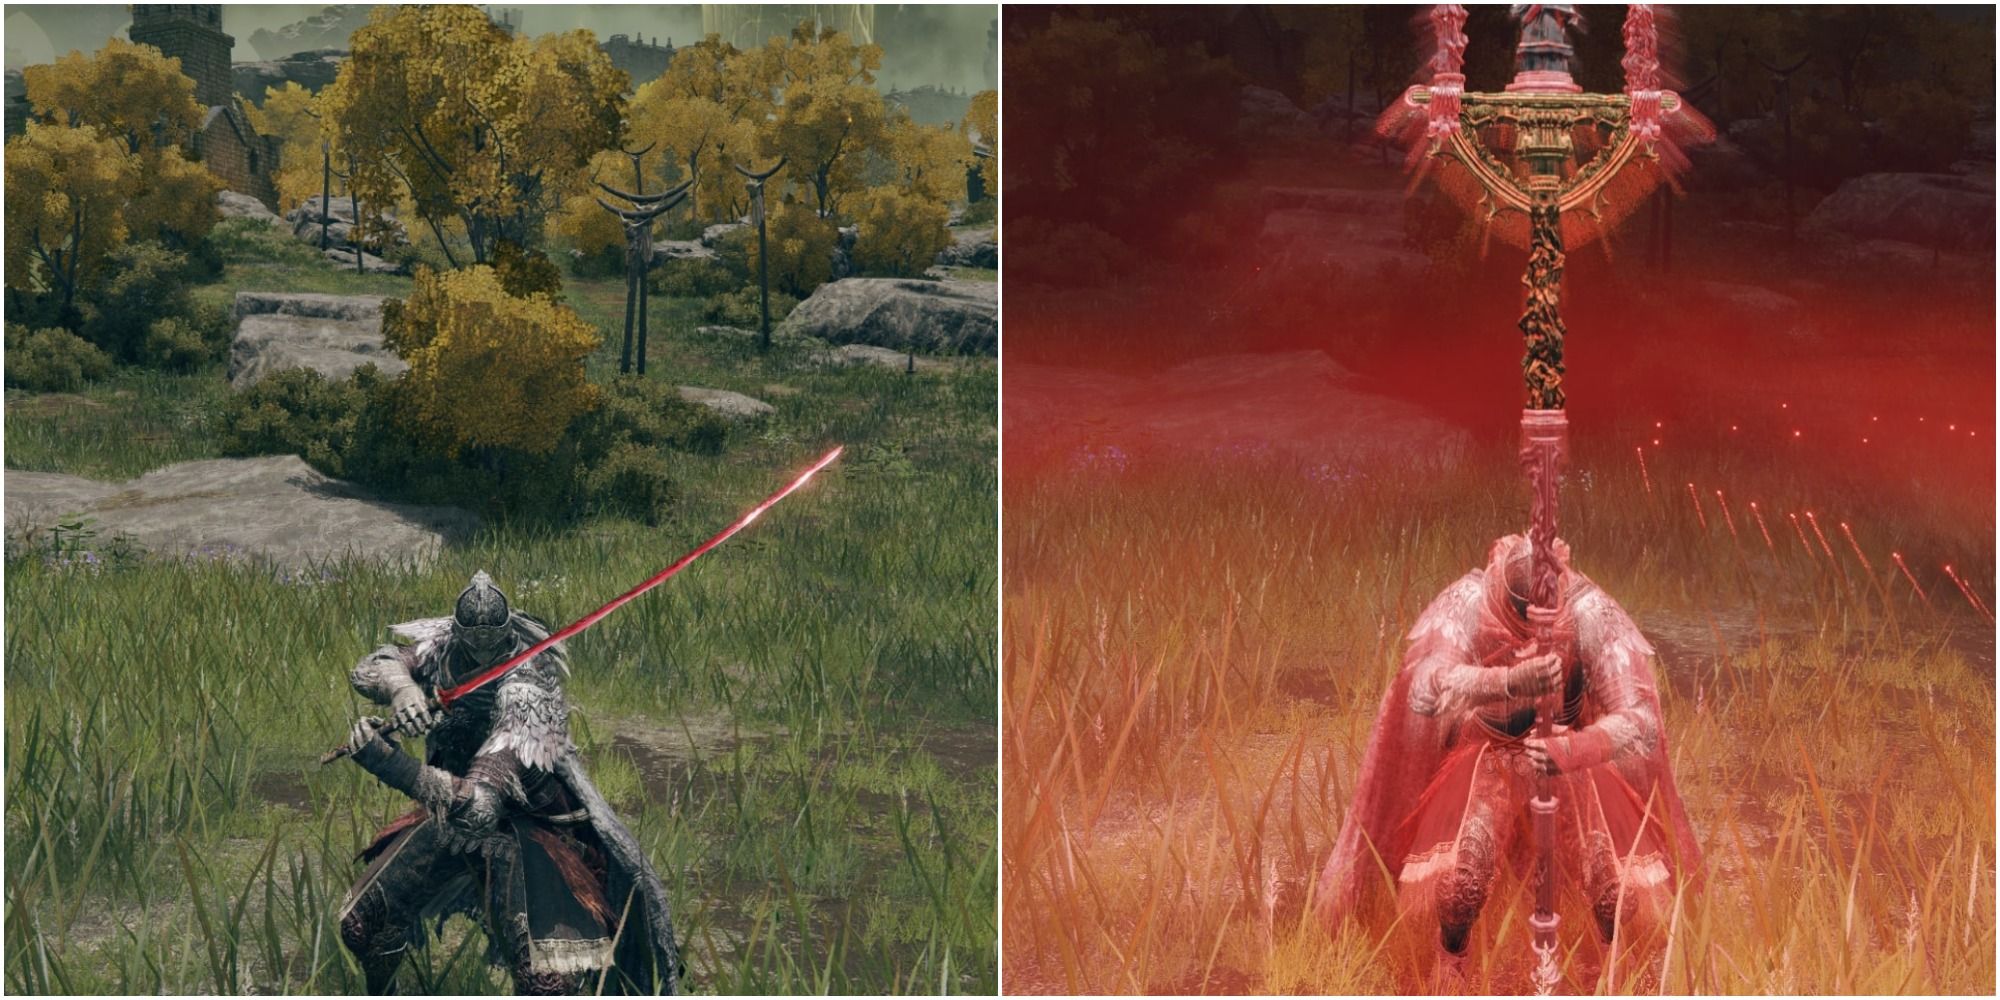 Elden Ring PVP Featured Image of weapons split image